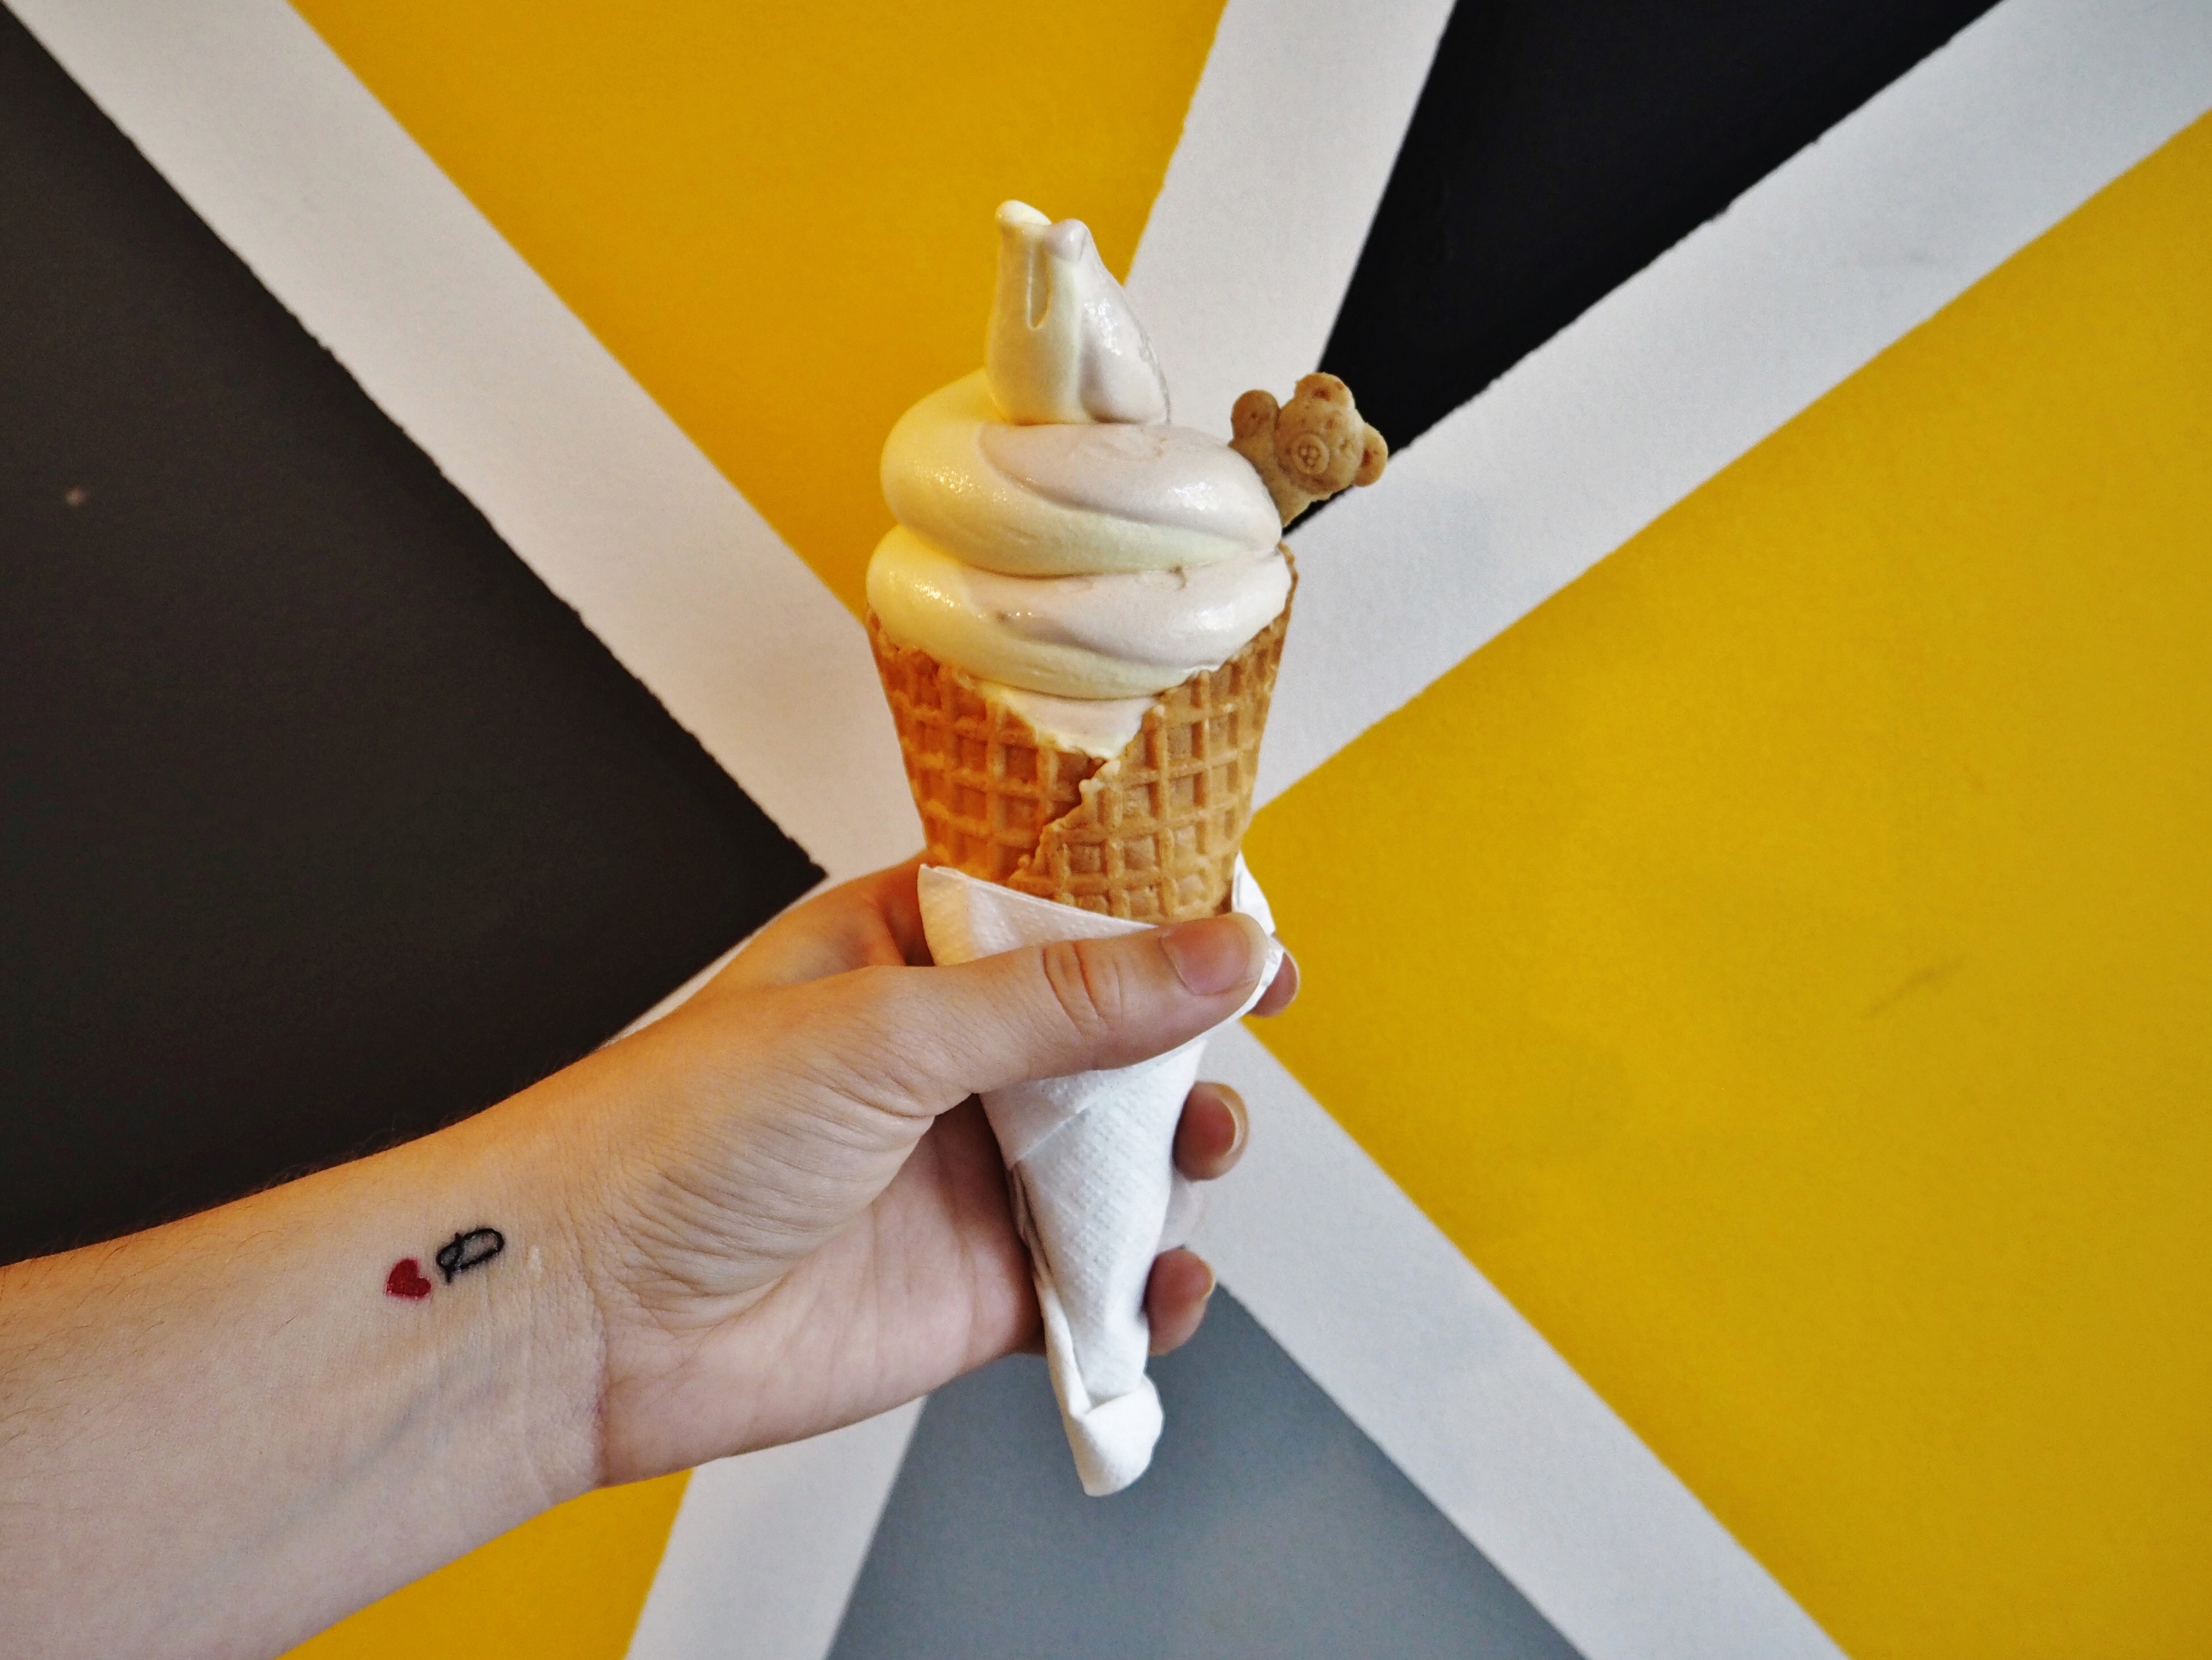 Discover More Edmonton Ice Cream in Old Strathcona